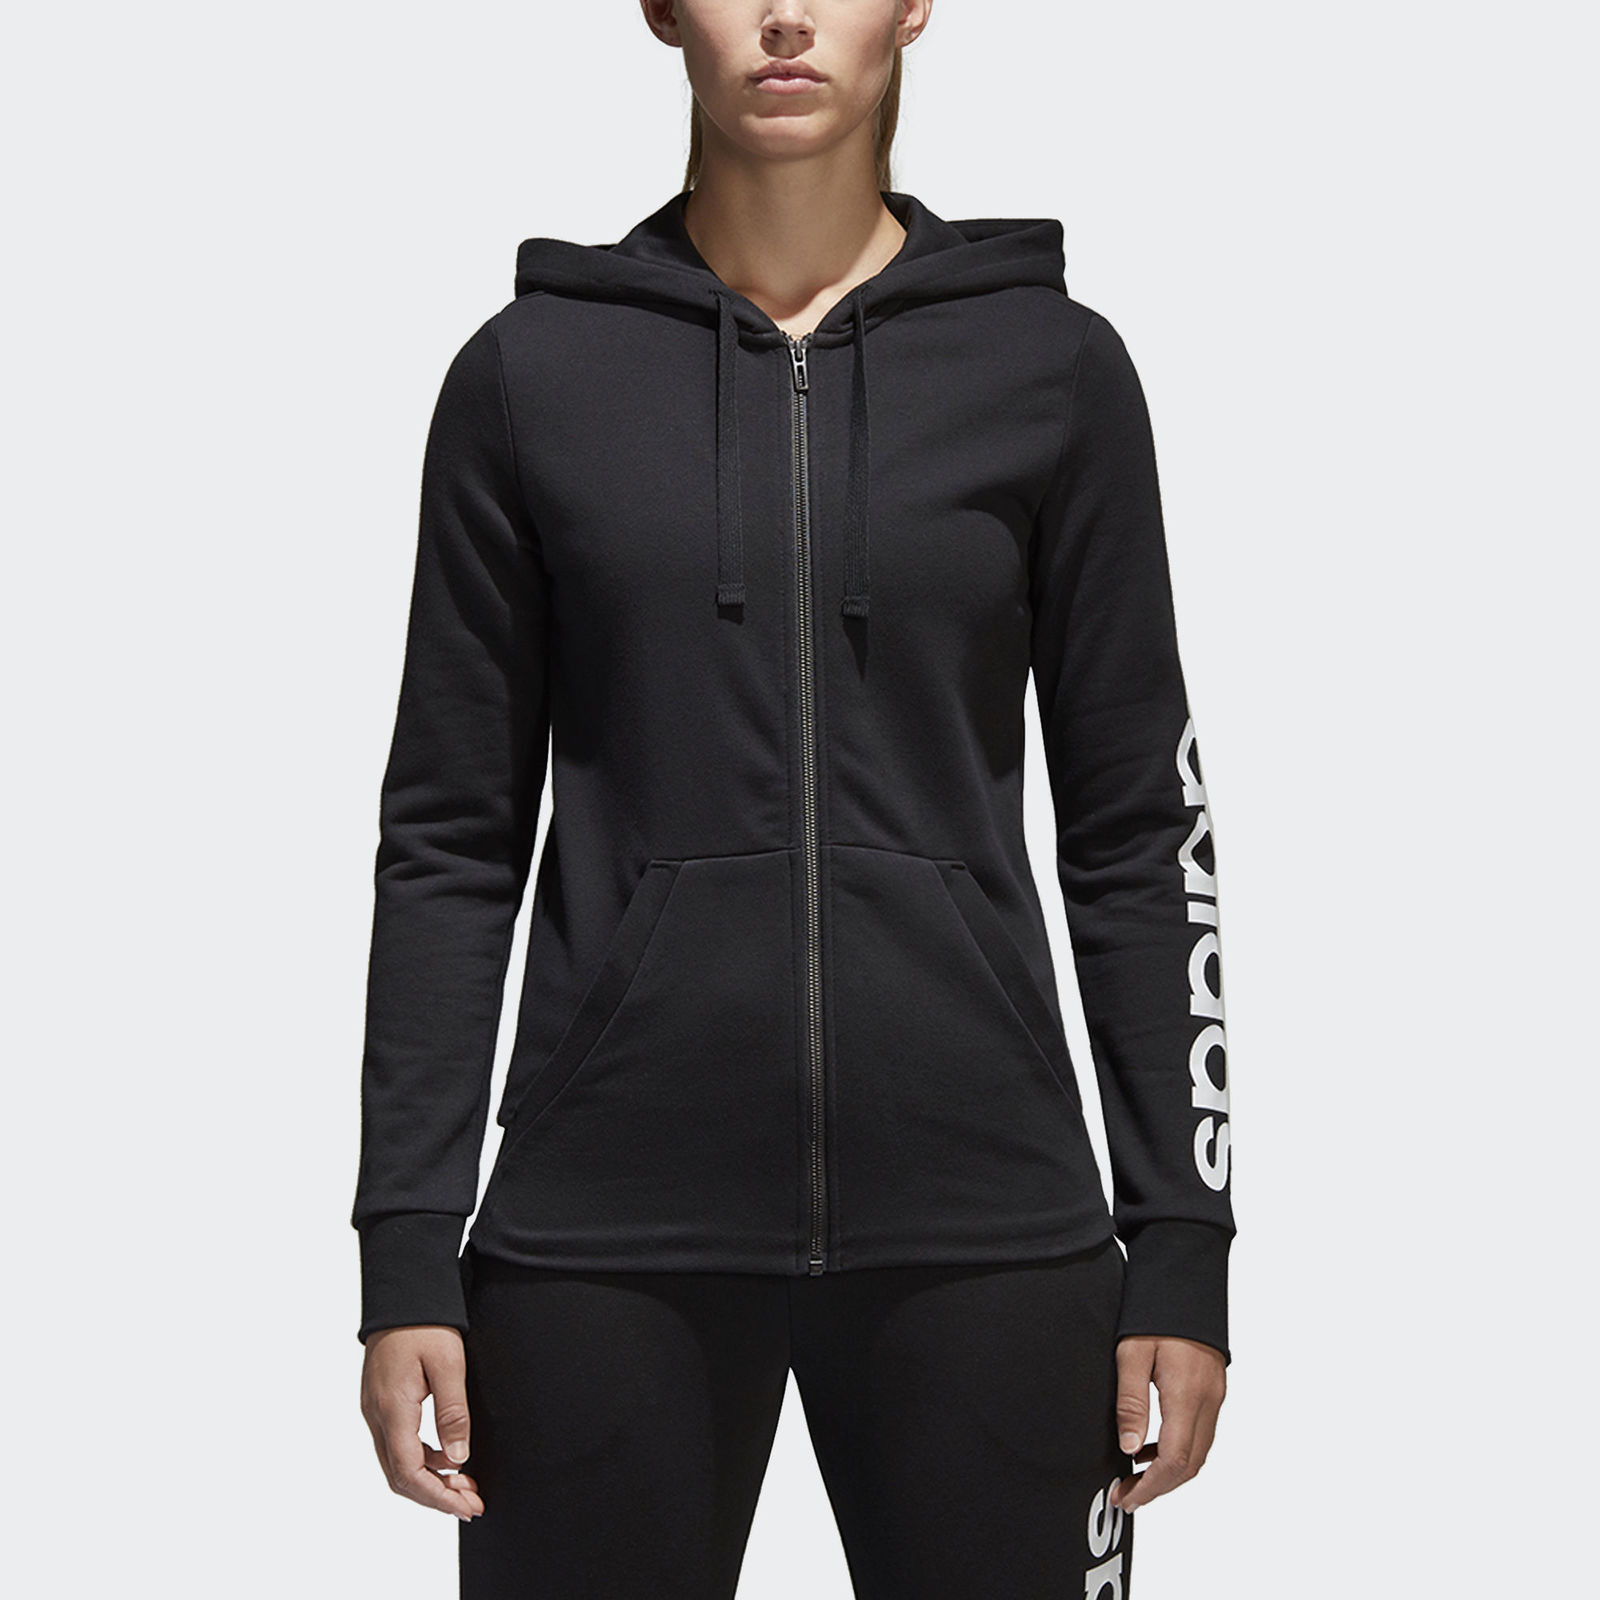 Adidas Essentials Linear Hoodie Women’s Black Jacket Only $19.99 Shipped!